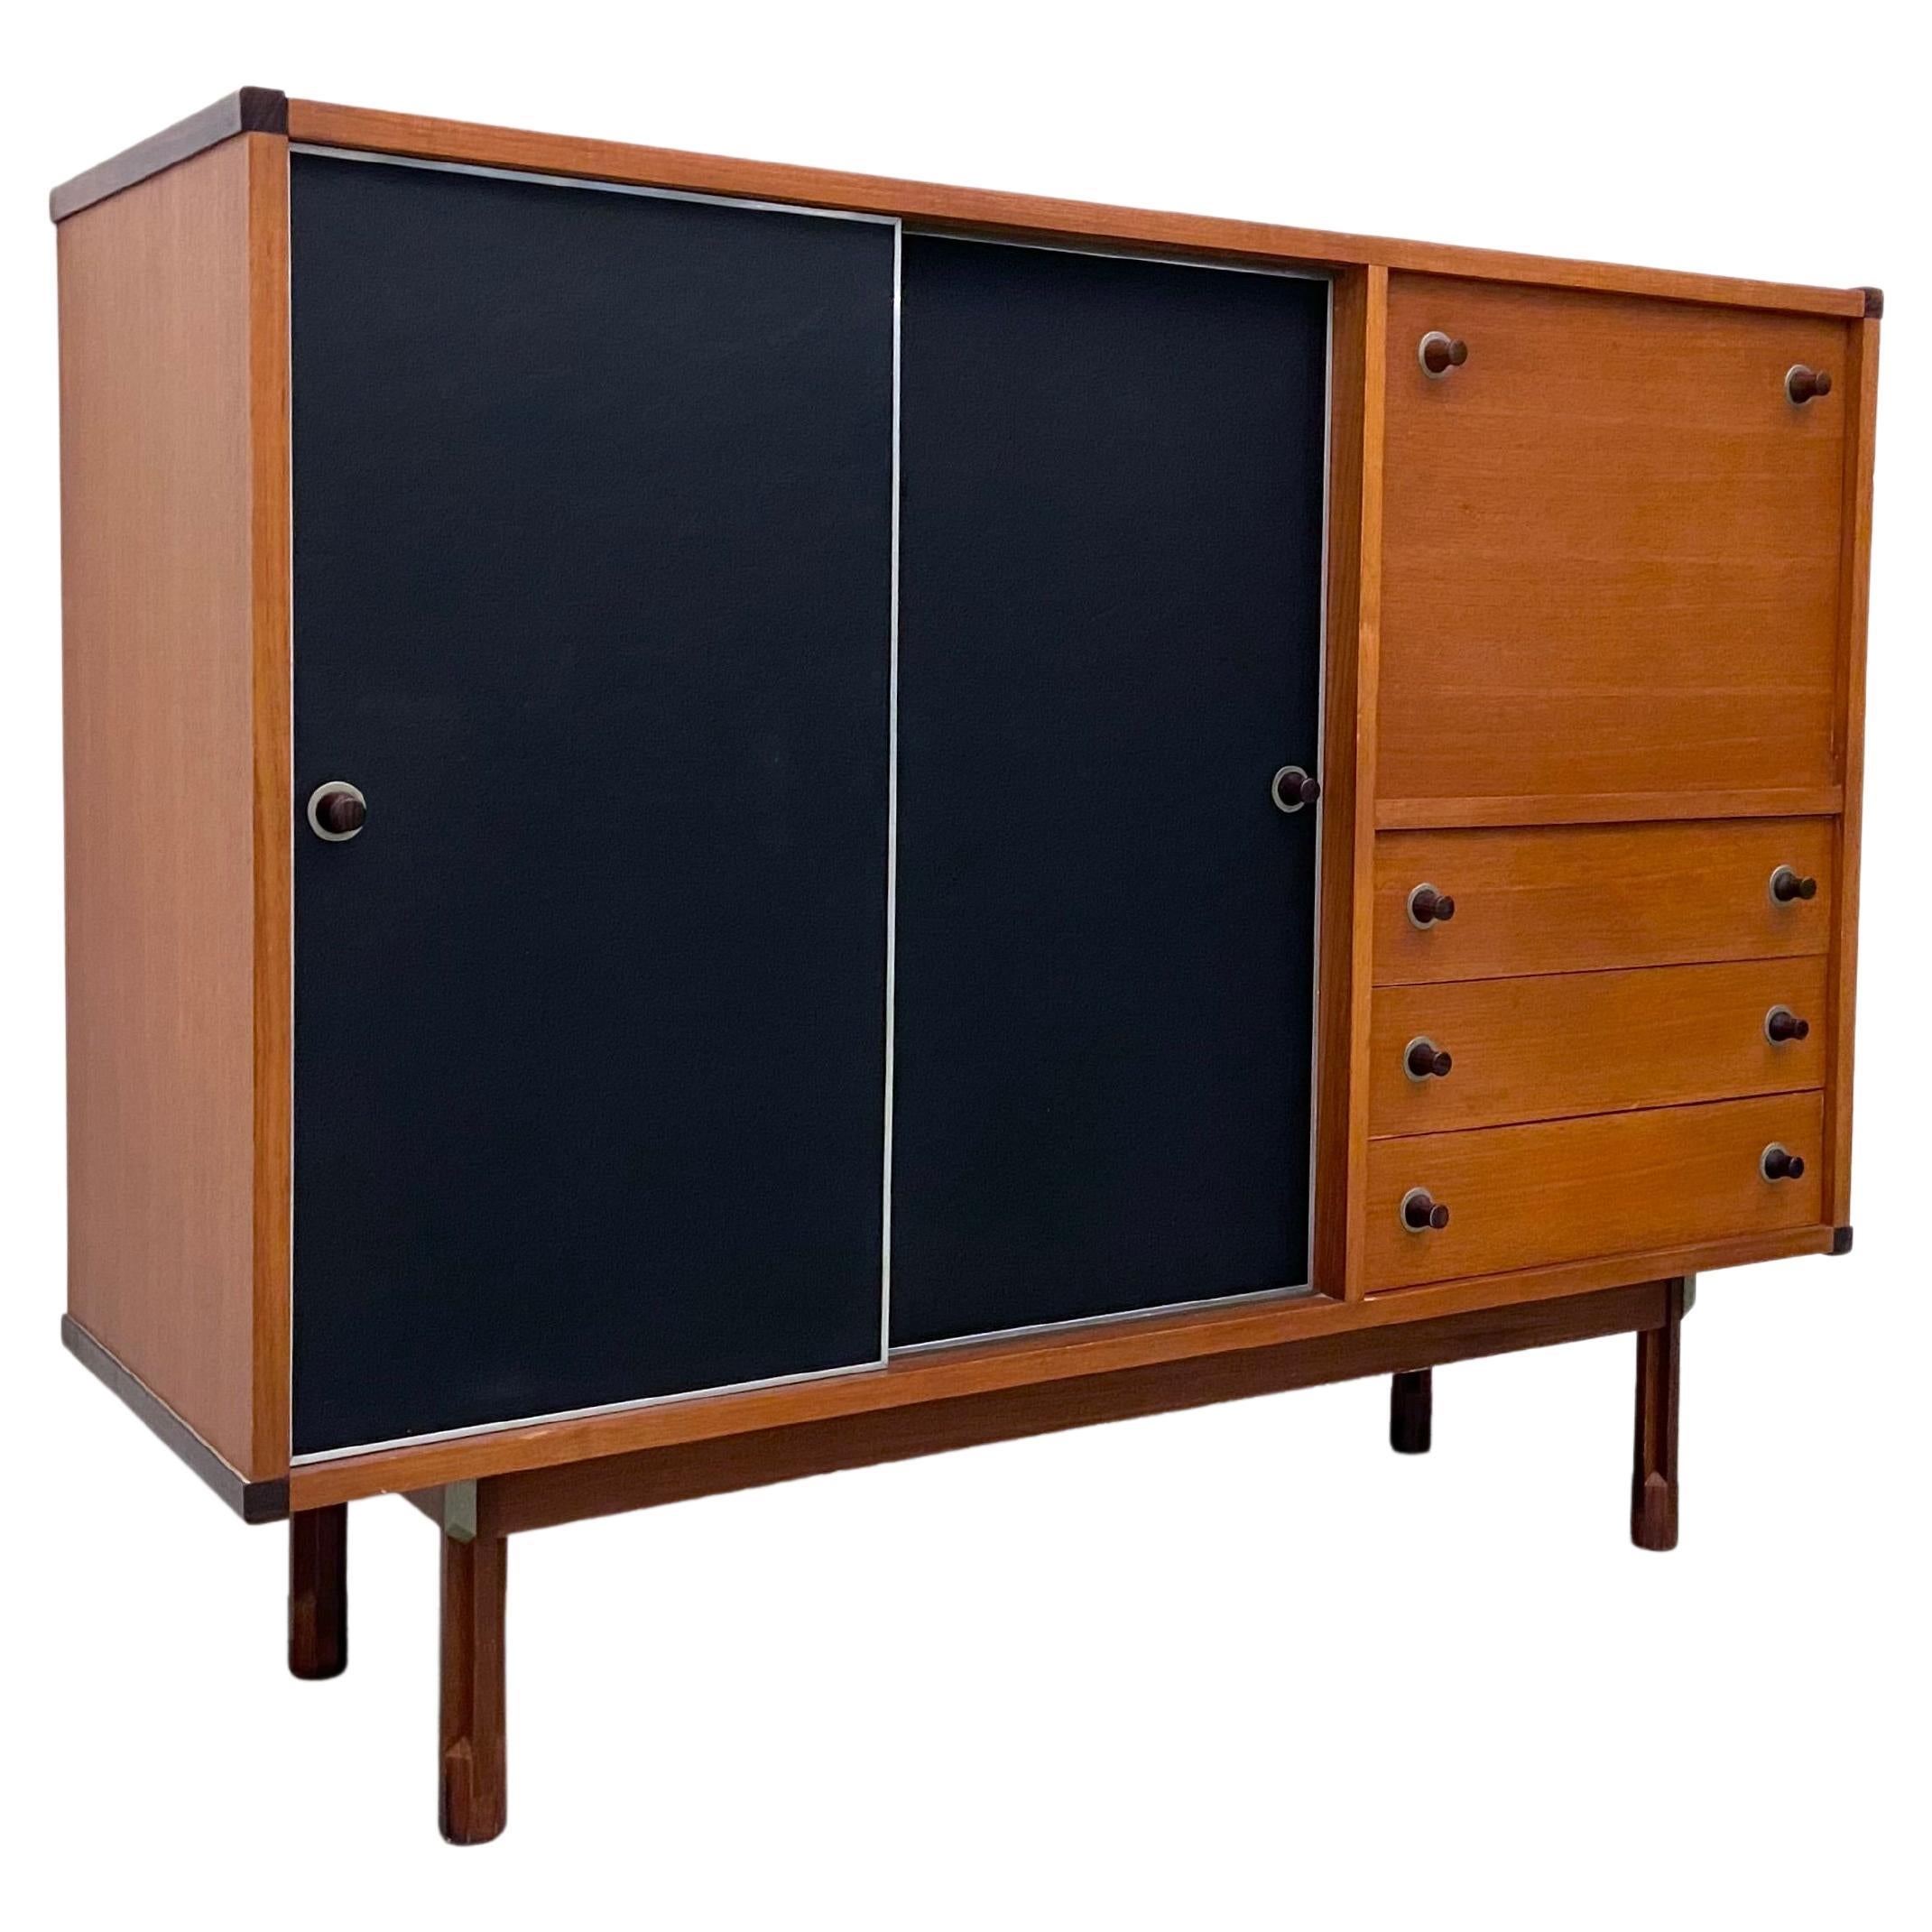 High Credenza by Pierro Ranzani for Elam in Laminate, Teak and Metal, 1962 For Sale